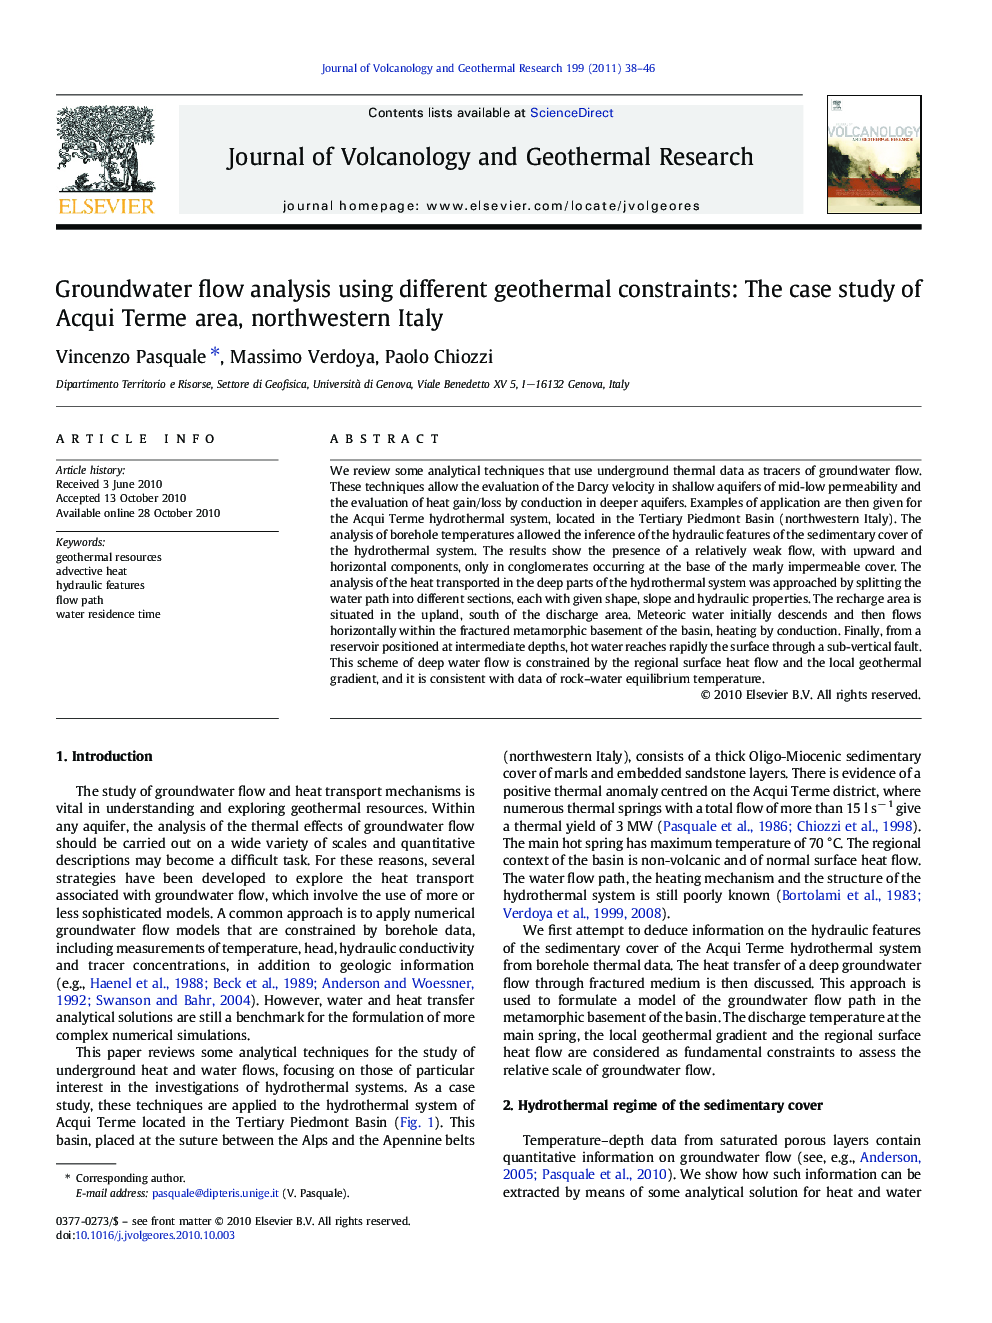 Groundwater flow analysis using different geothermal constraints: The case study of Acqui Terme area, northwestern Italy